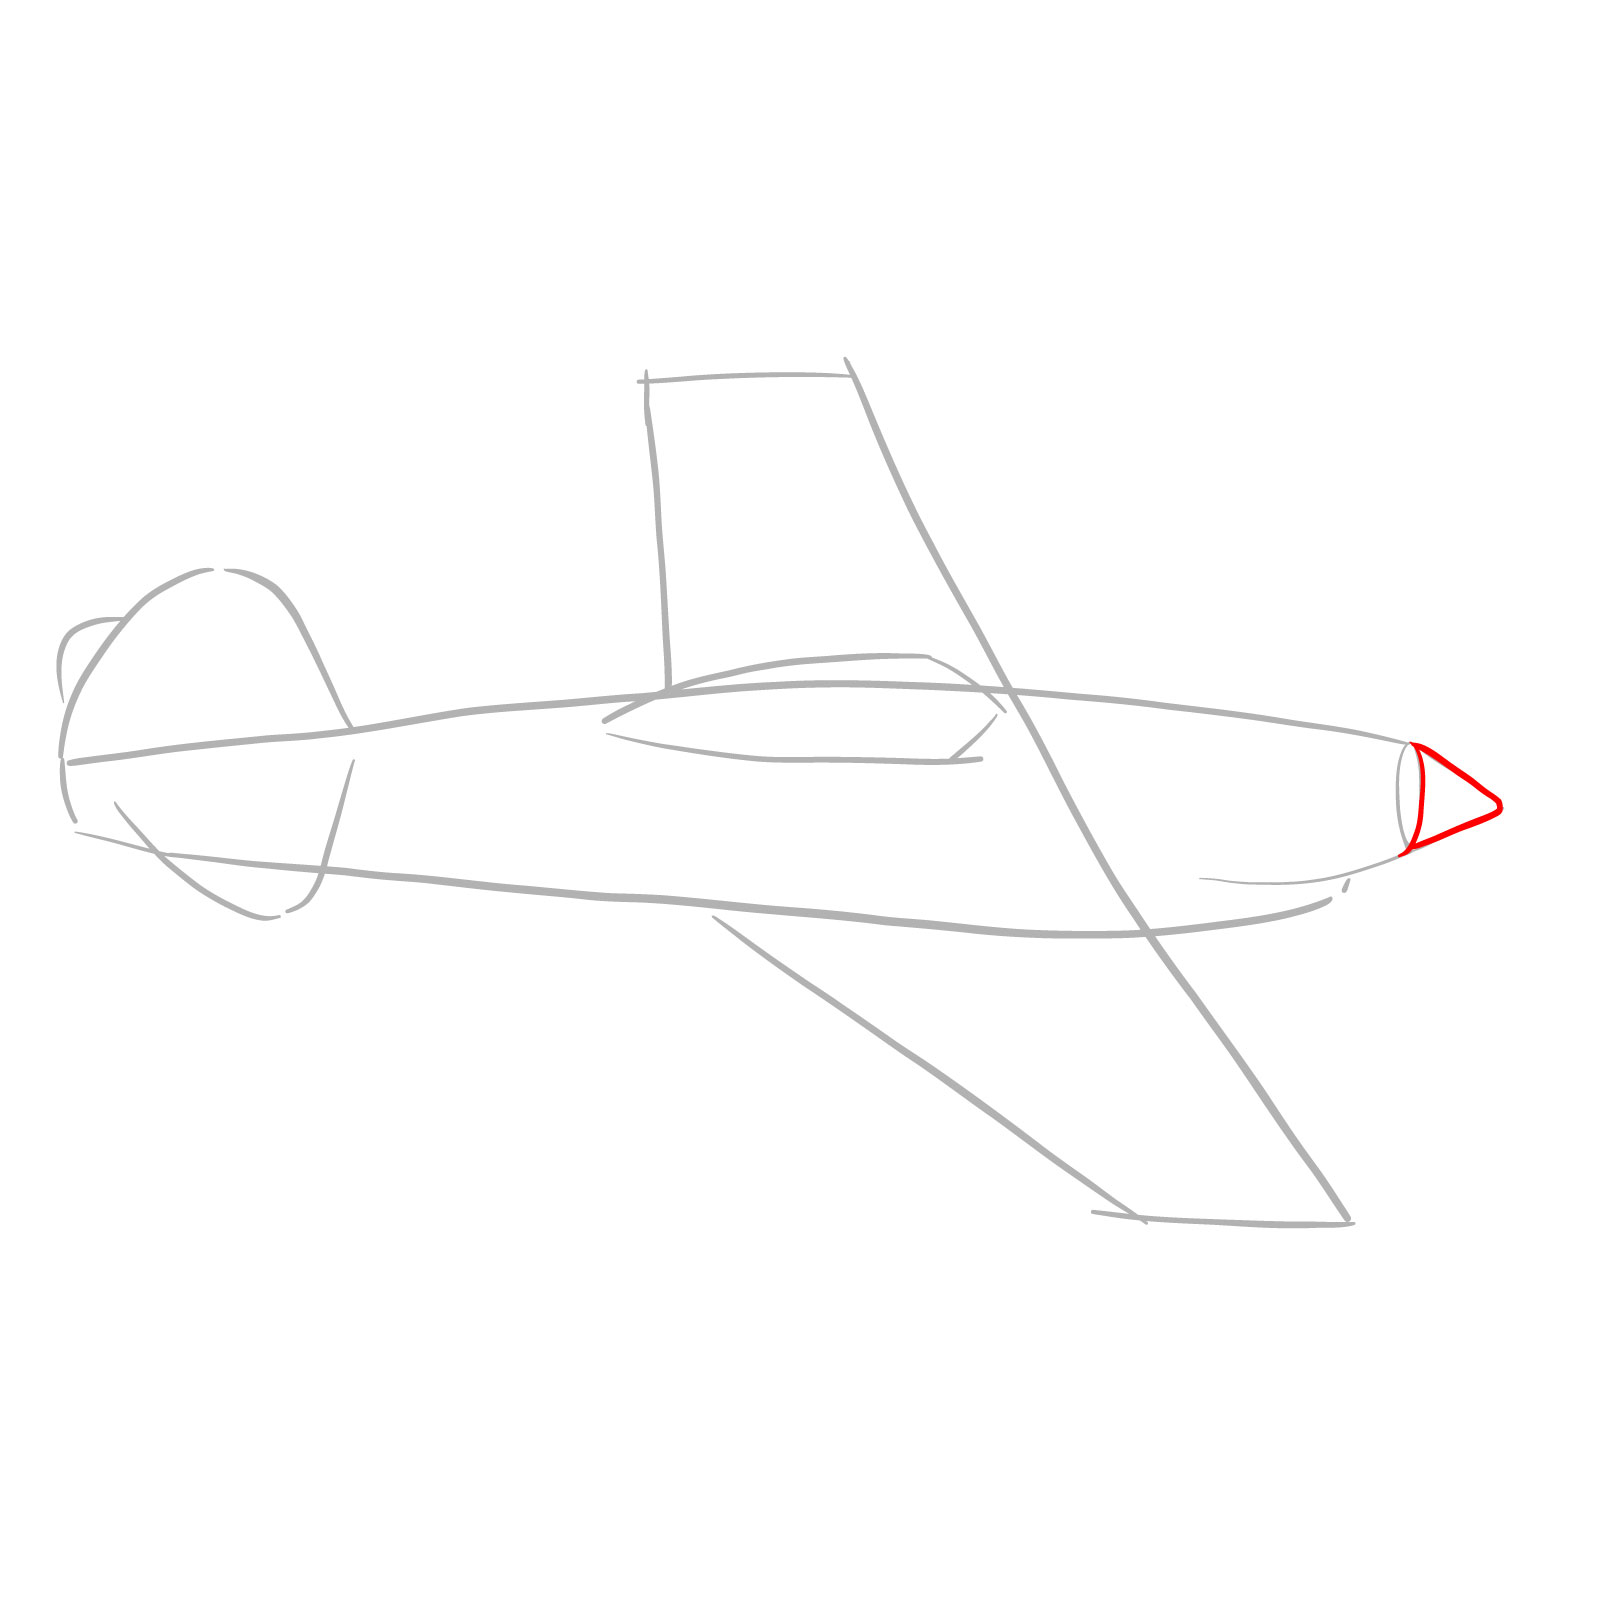 How to draw a P-40 Flying Tiger - step 04